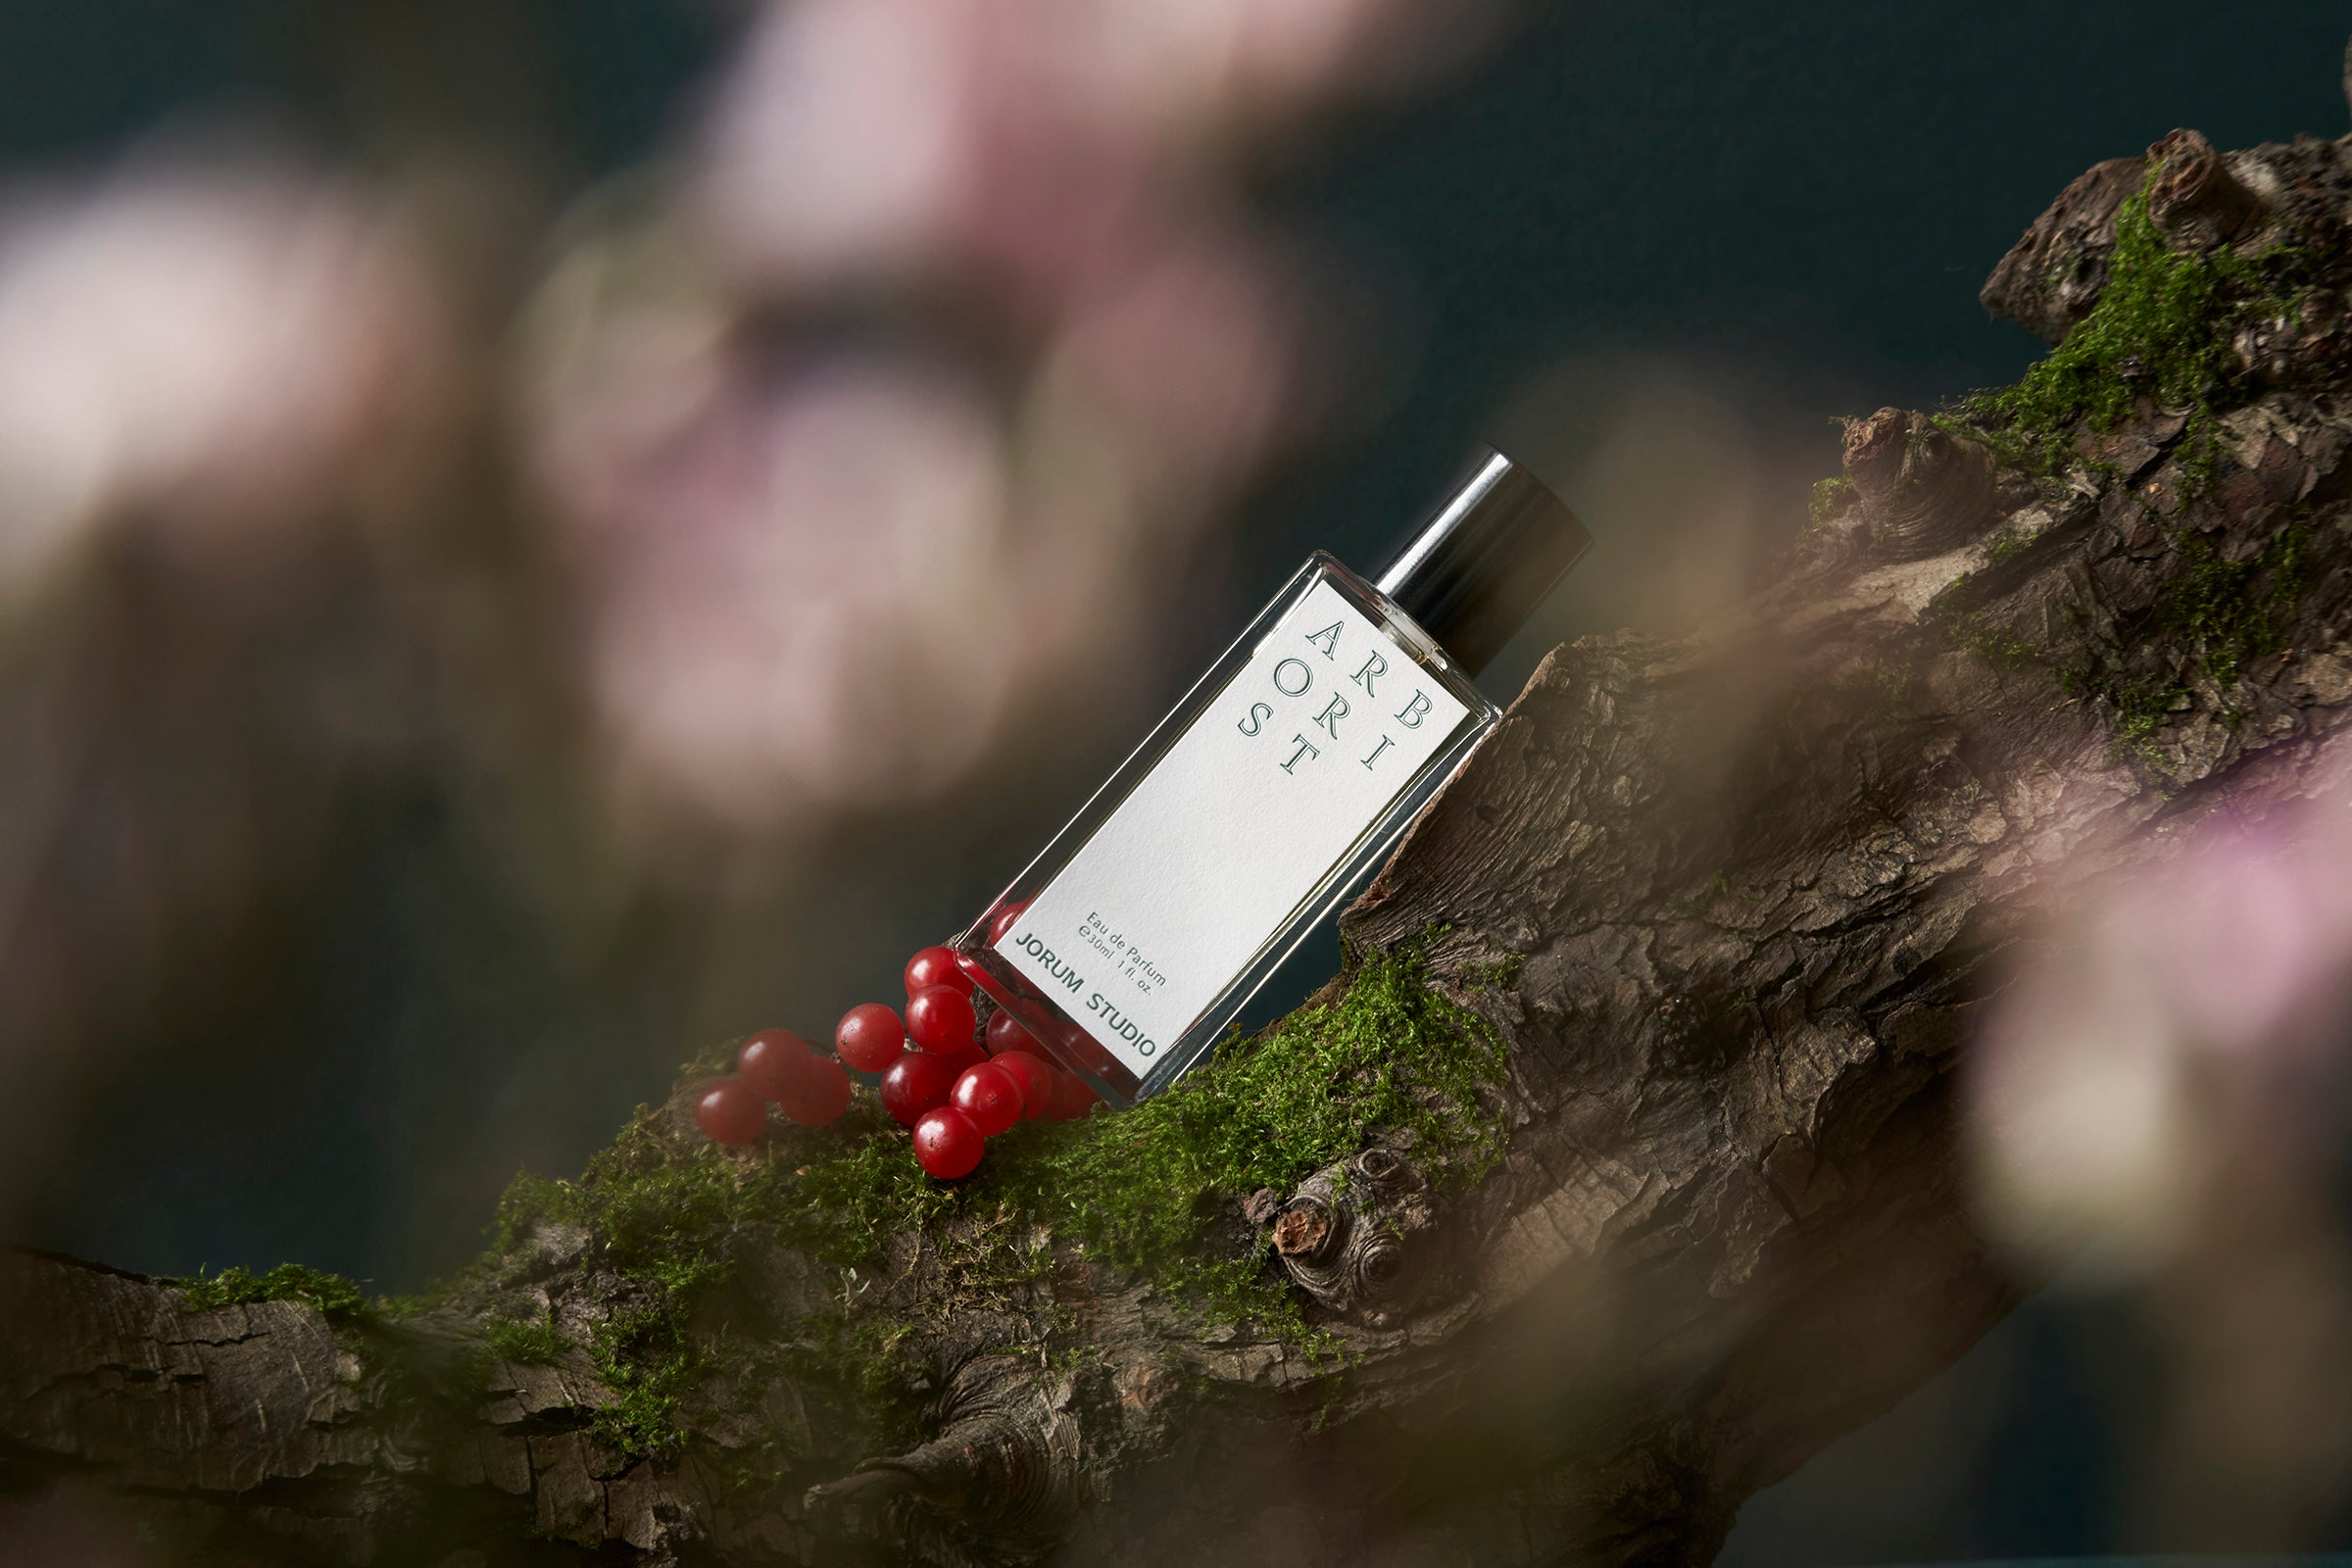 Bottle of Arborist fragrance leaning on a mossy tree branch with forest fruits and flora